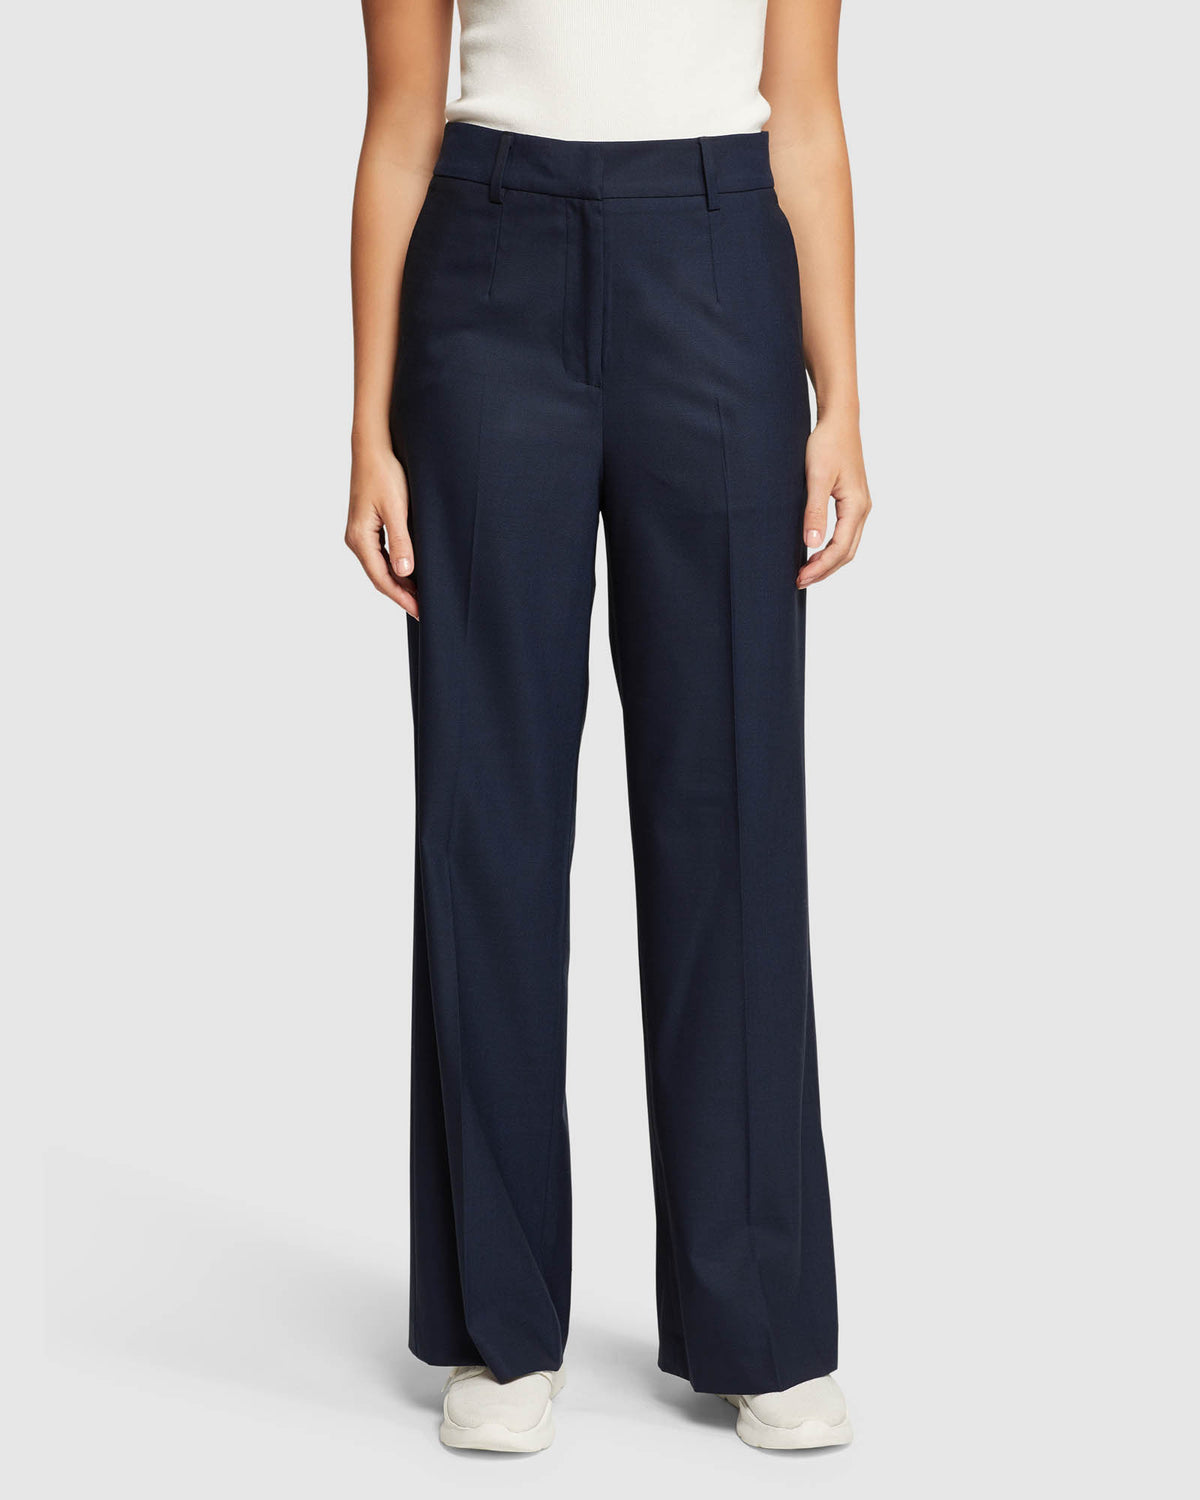 Straight trousers for women, high wasted pants | A.P.C.